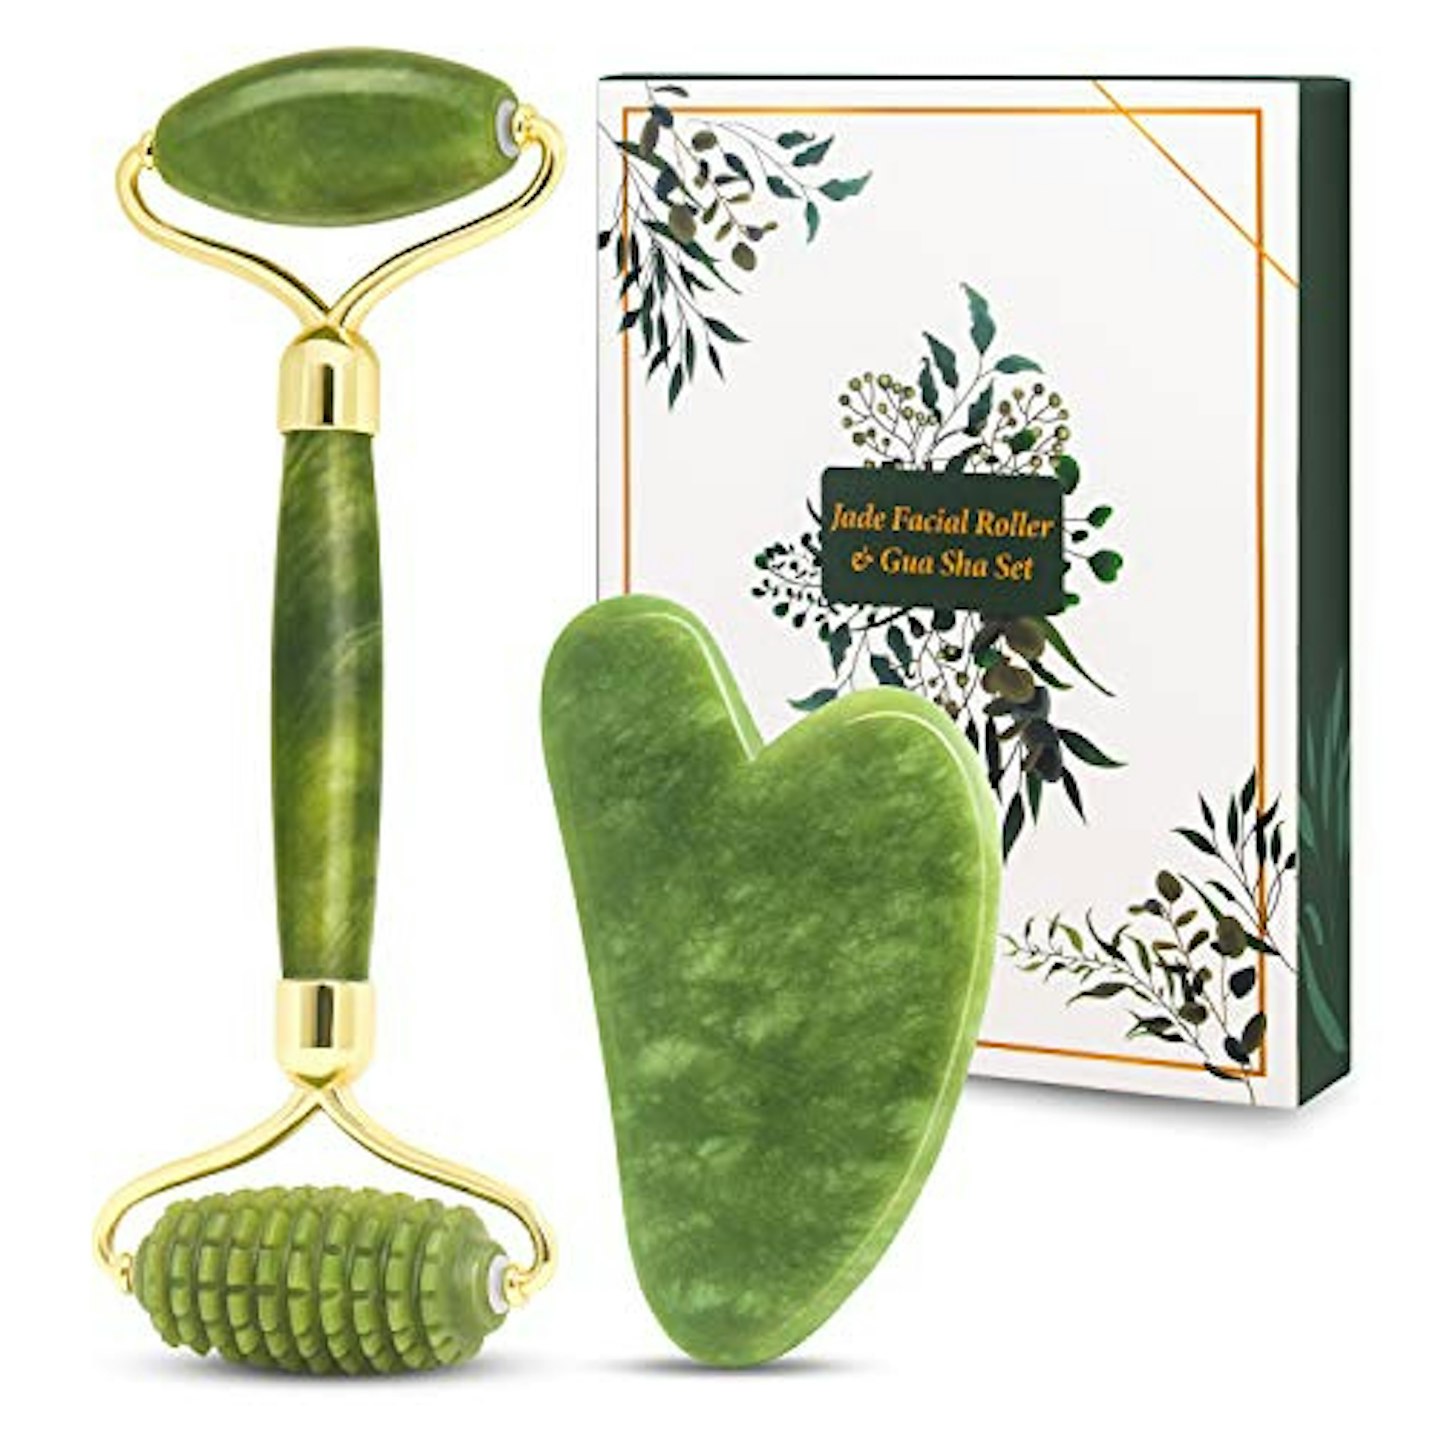  GRANDFUN Stocking Stuffers for Women Gifts Christmas: Face  Roller Gua Sha Tool Unique Birthday Present Idea Gadget for Wife Mom Her  Girlfriend Sister Mother Who Have Everything Facial Beauty Massager 